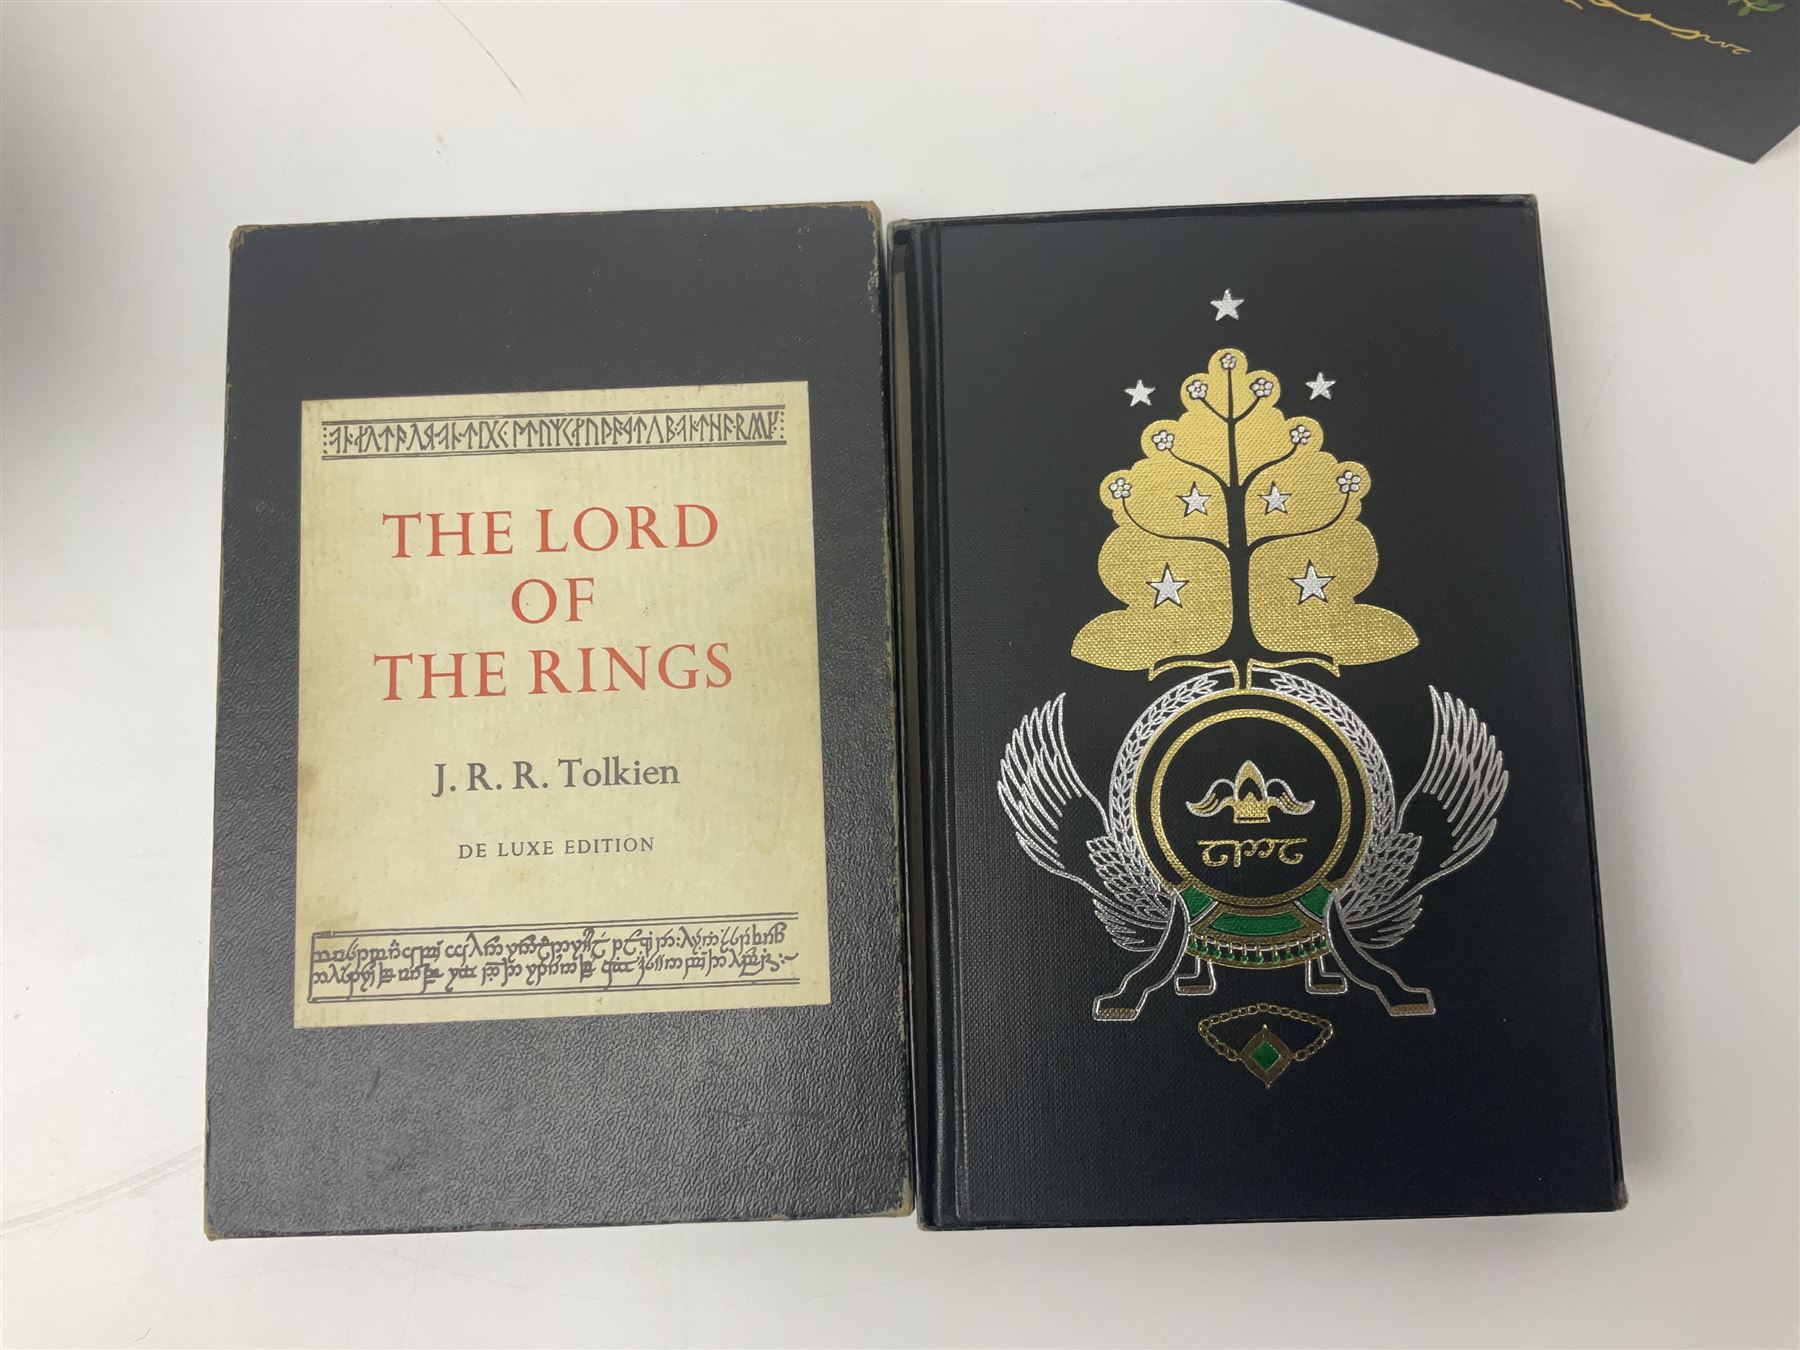 J.R.R. Tolkien 'The Lord of the Rings' Deluxe Edition seventh impression and 'Poems and Stories' pub - Image 2 of 23